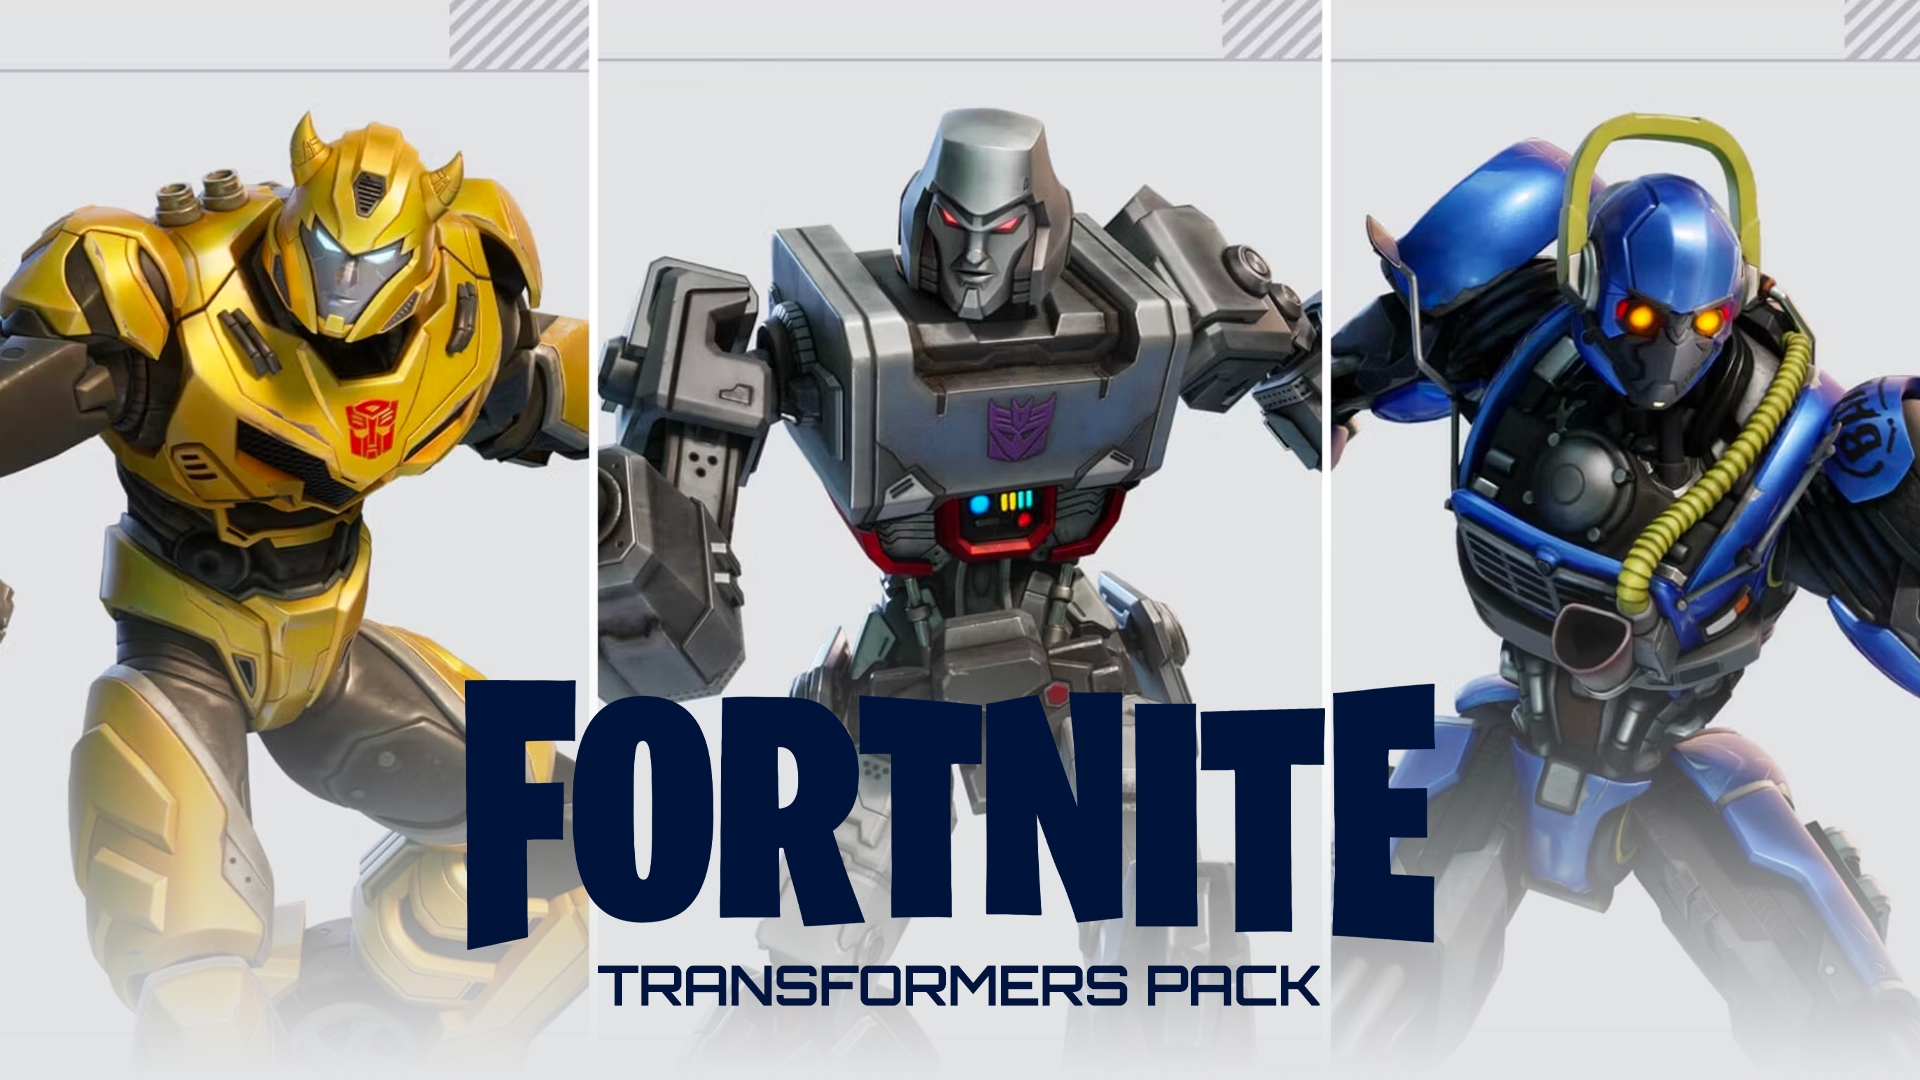 https://gaming-cdn.com/images/products/14693/orig/fortnite-transformers-pack-ps4-playstation-4-game-playstation-store-cover.jpg?v=1696935564